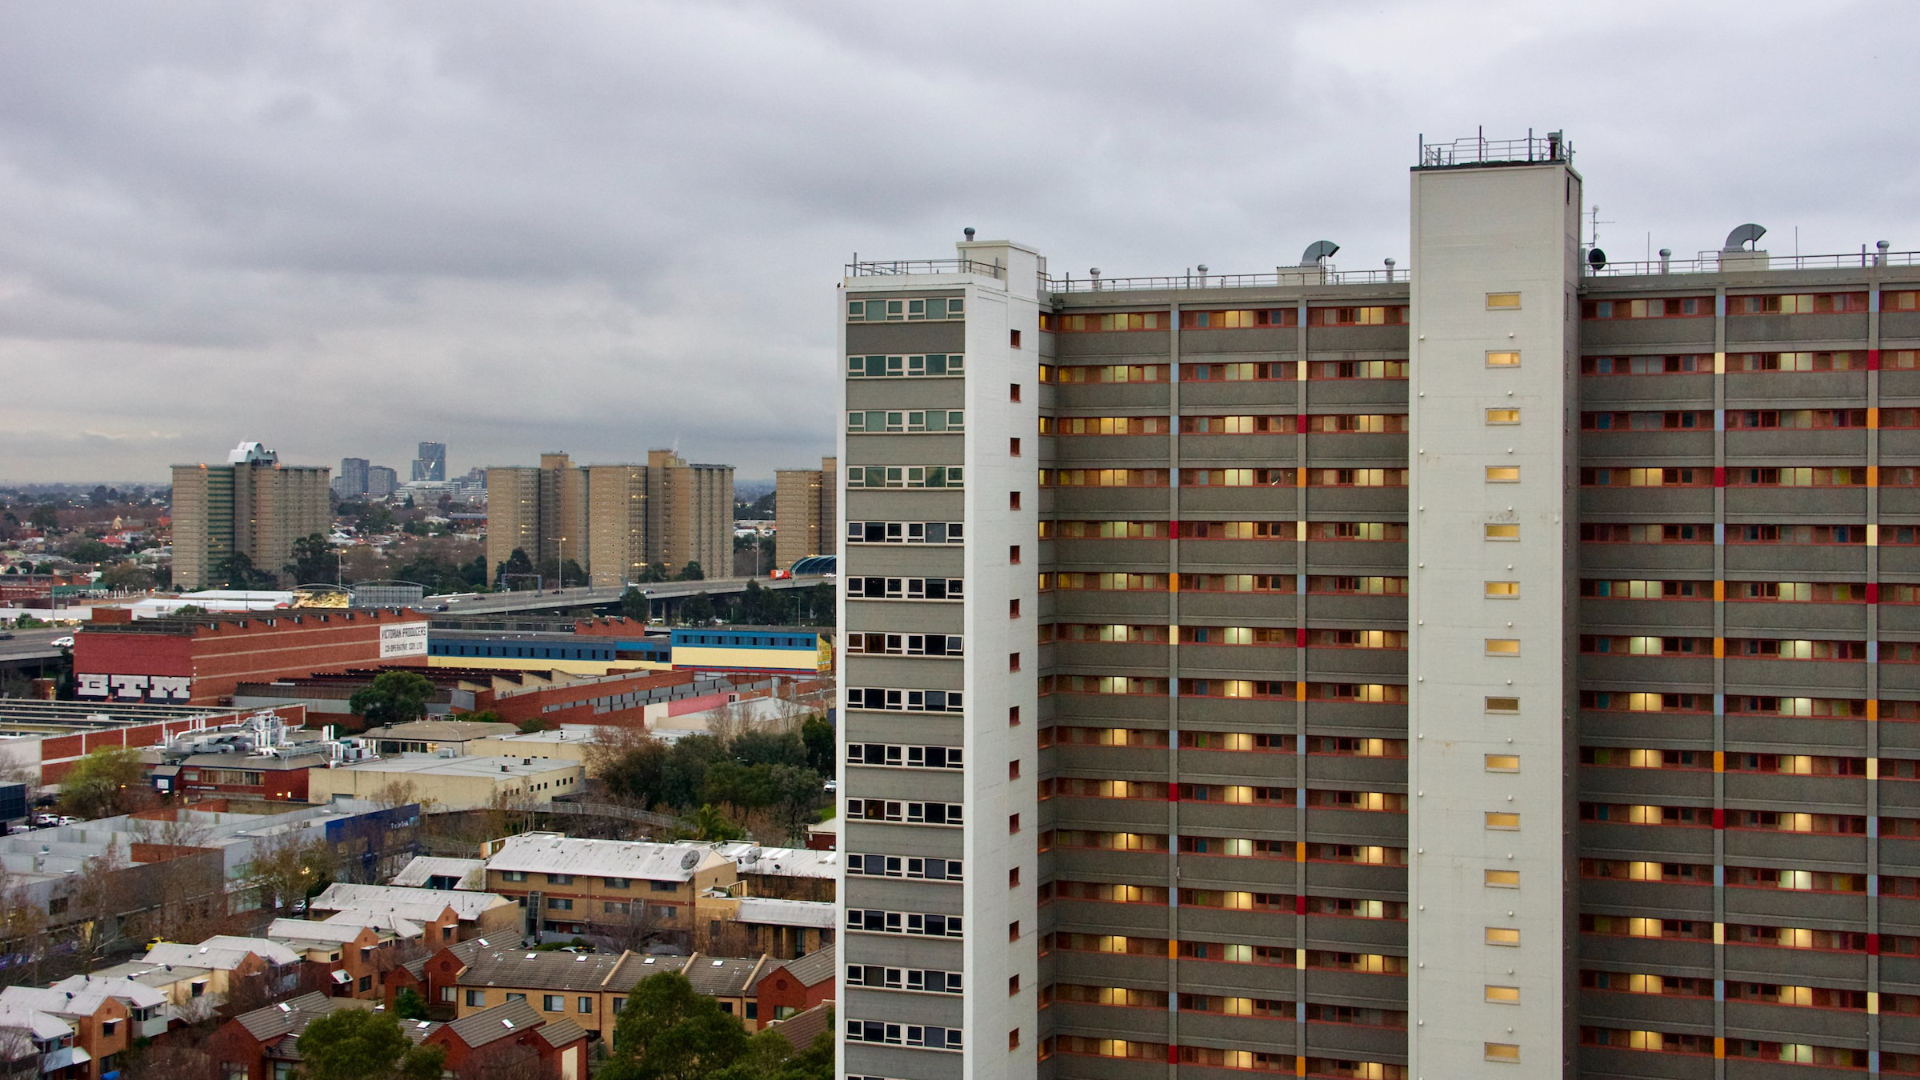 Public and community housing is continuing to fall behind private landlord funding